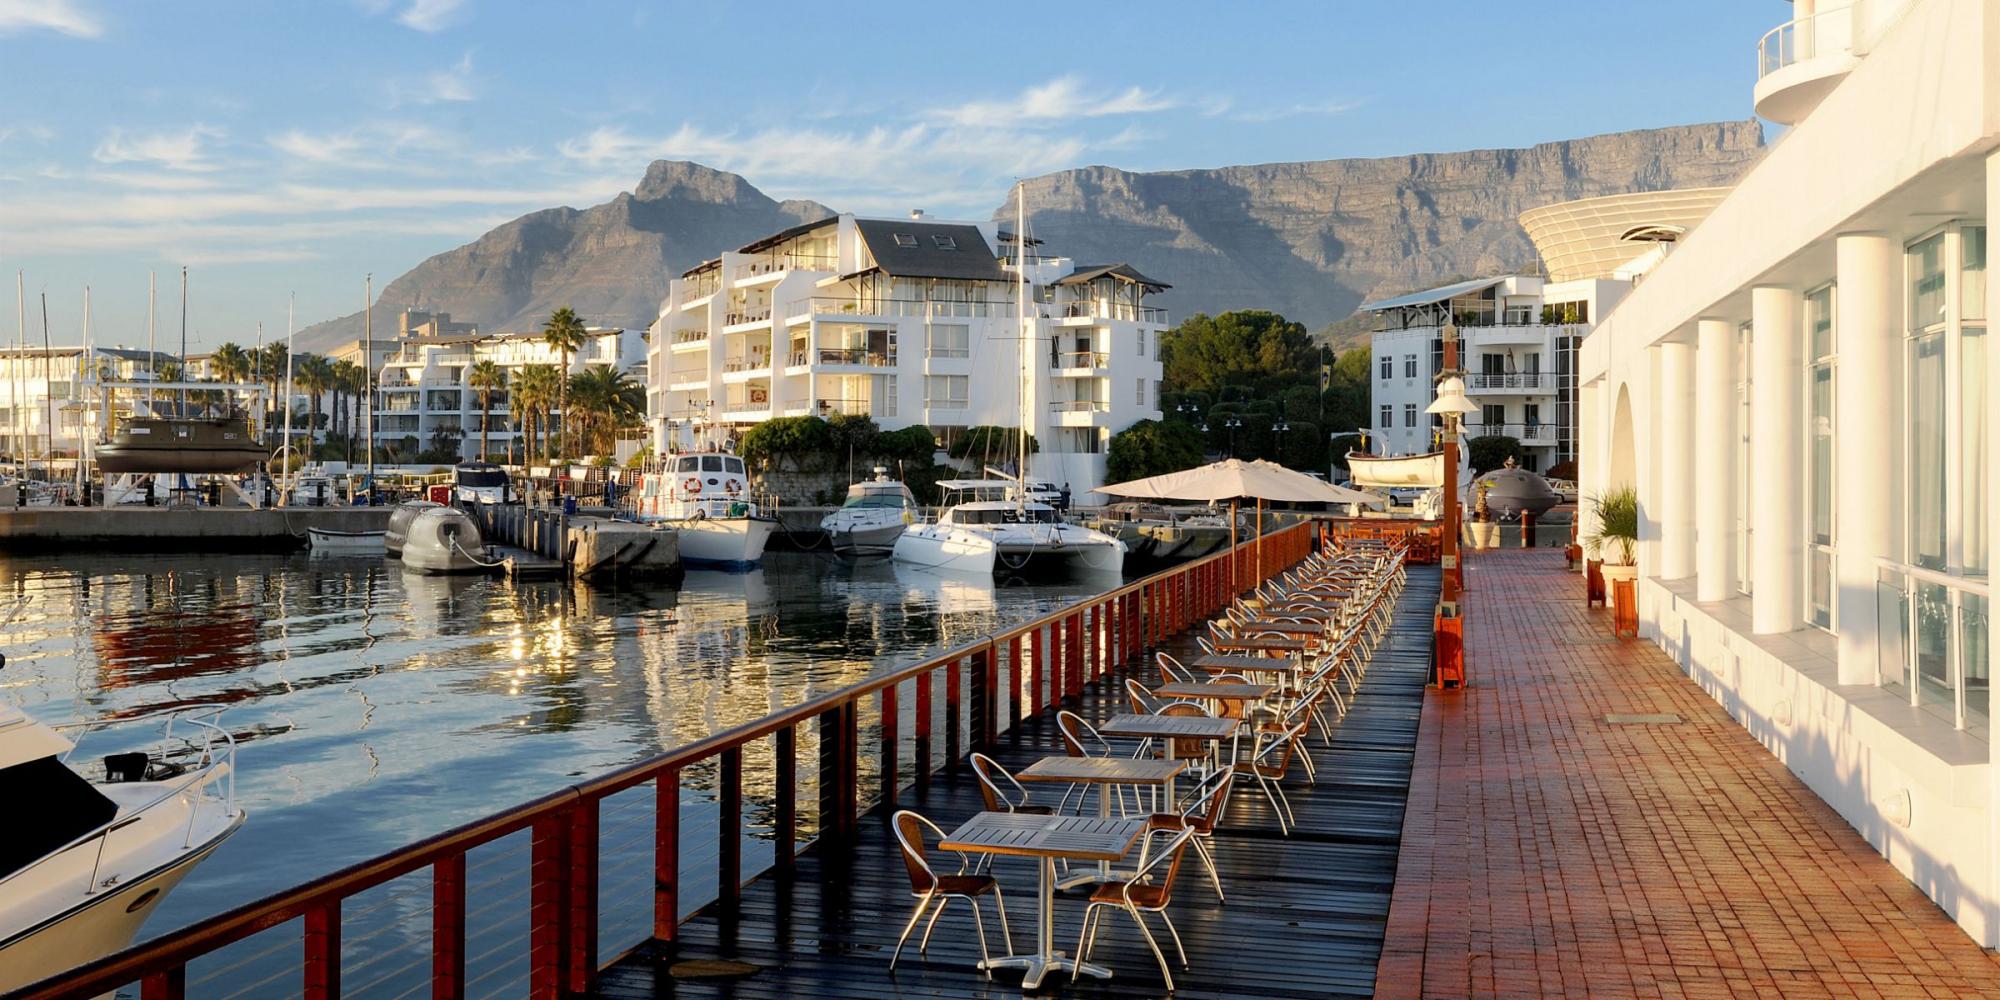 Radisson Blu Waterfront: Cape Town Hotel Review